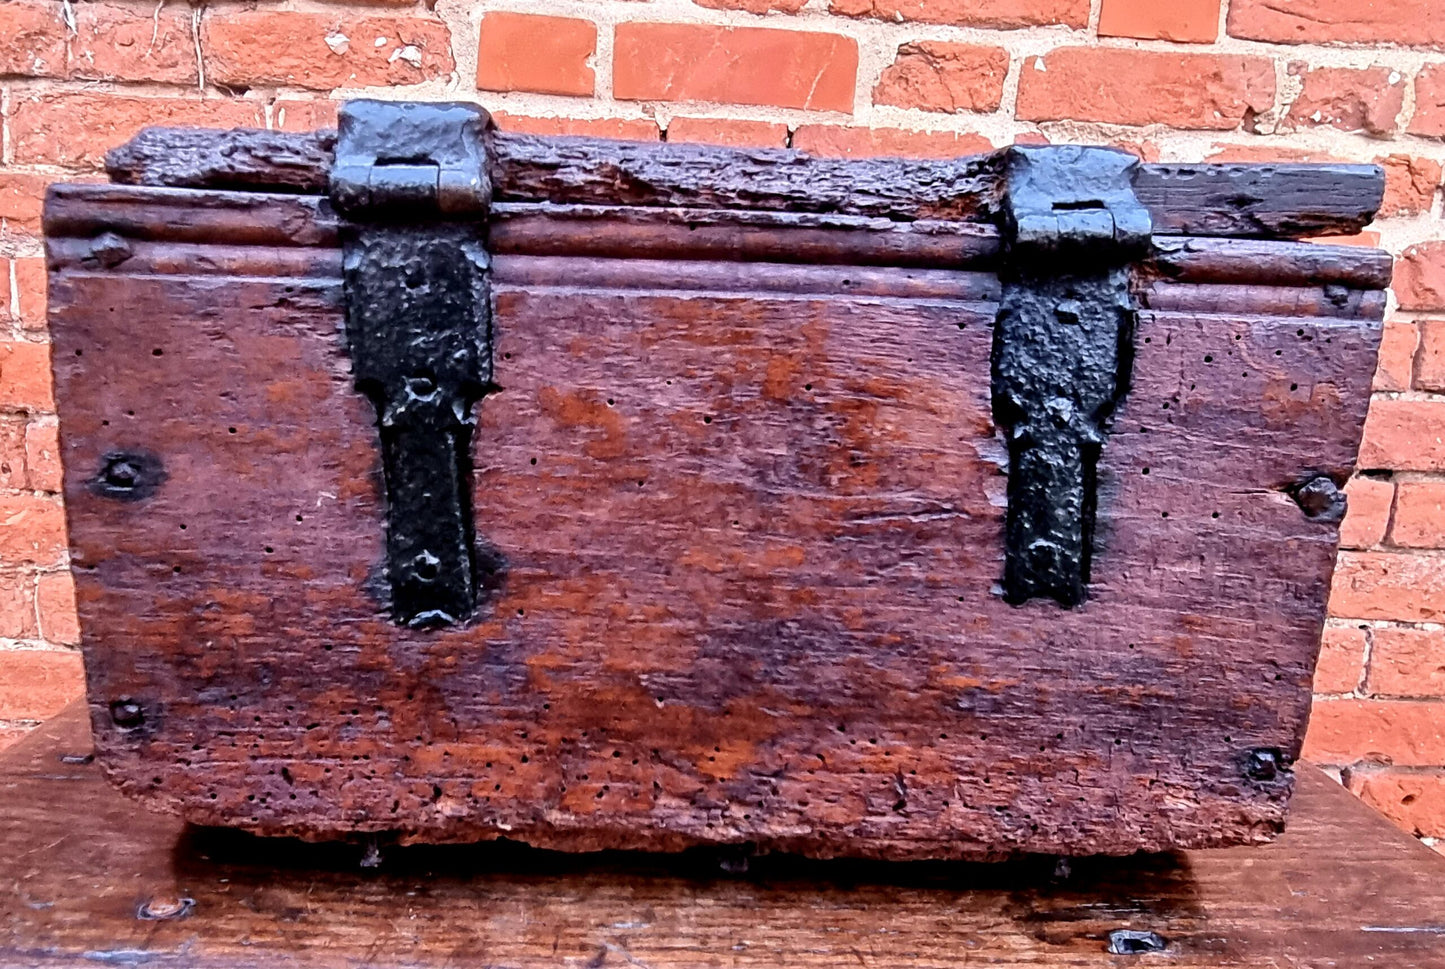 Late 15th Century / Early 16th Century French Antique Oak Offertory Box